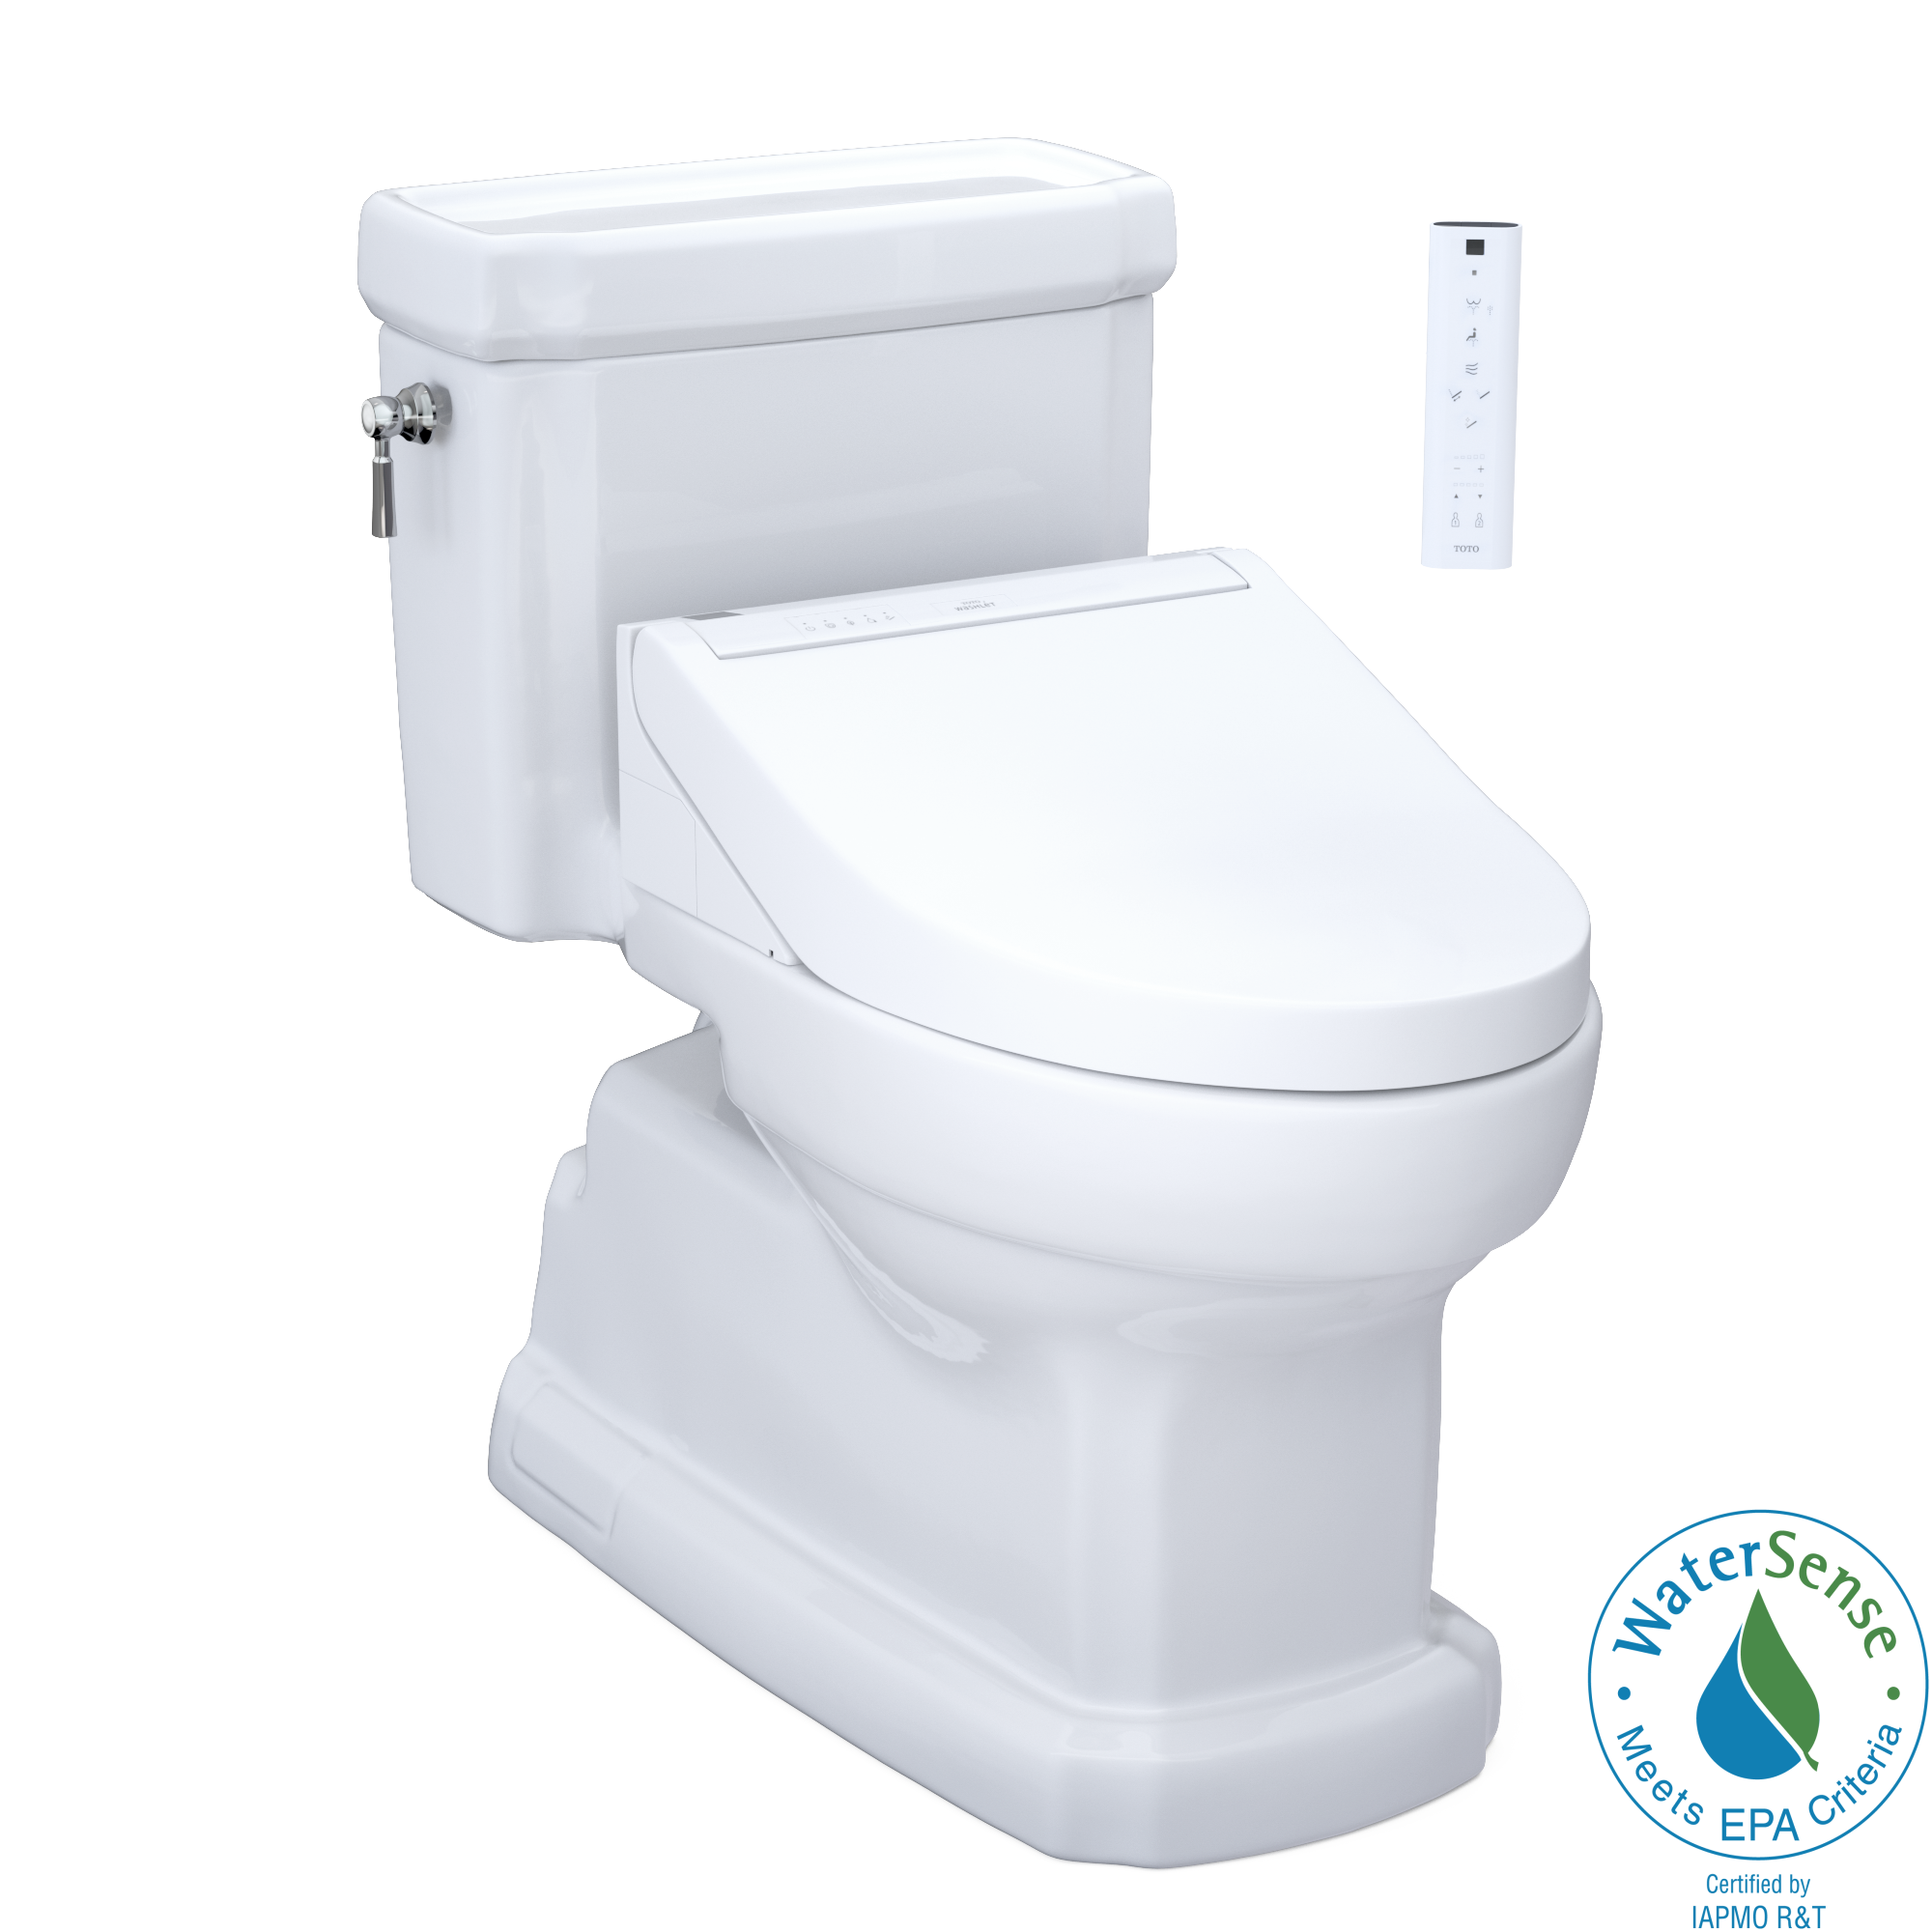 TOTO WASHLET+ Eco Guinevere Elongated 1.28 GPF Universal Height Toilet with C5 Bidet Seat, Cotton White - MW9743084CEFG#01